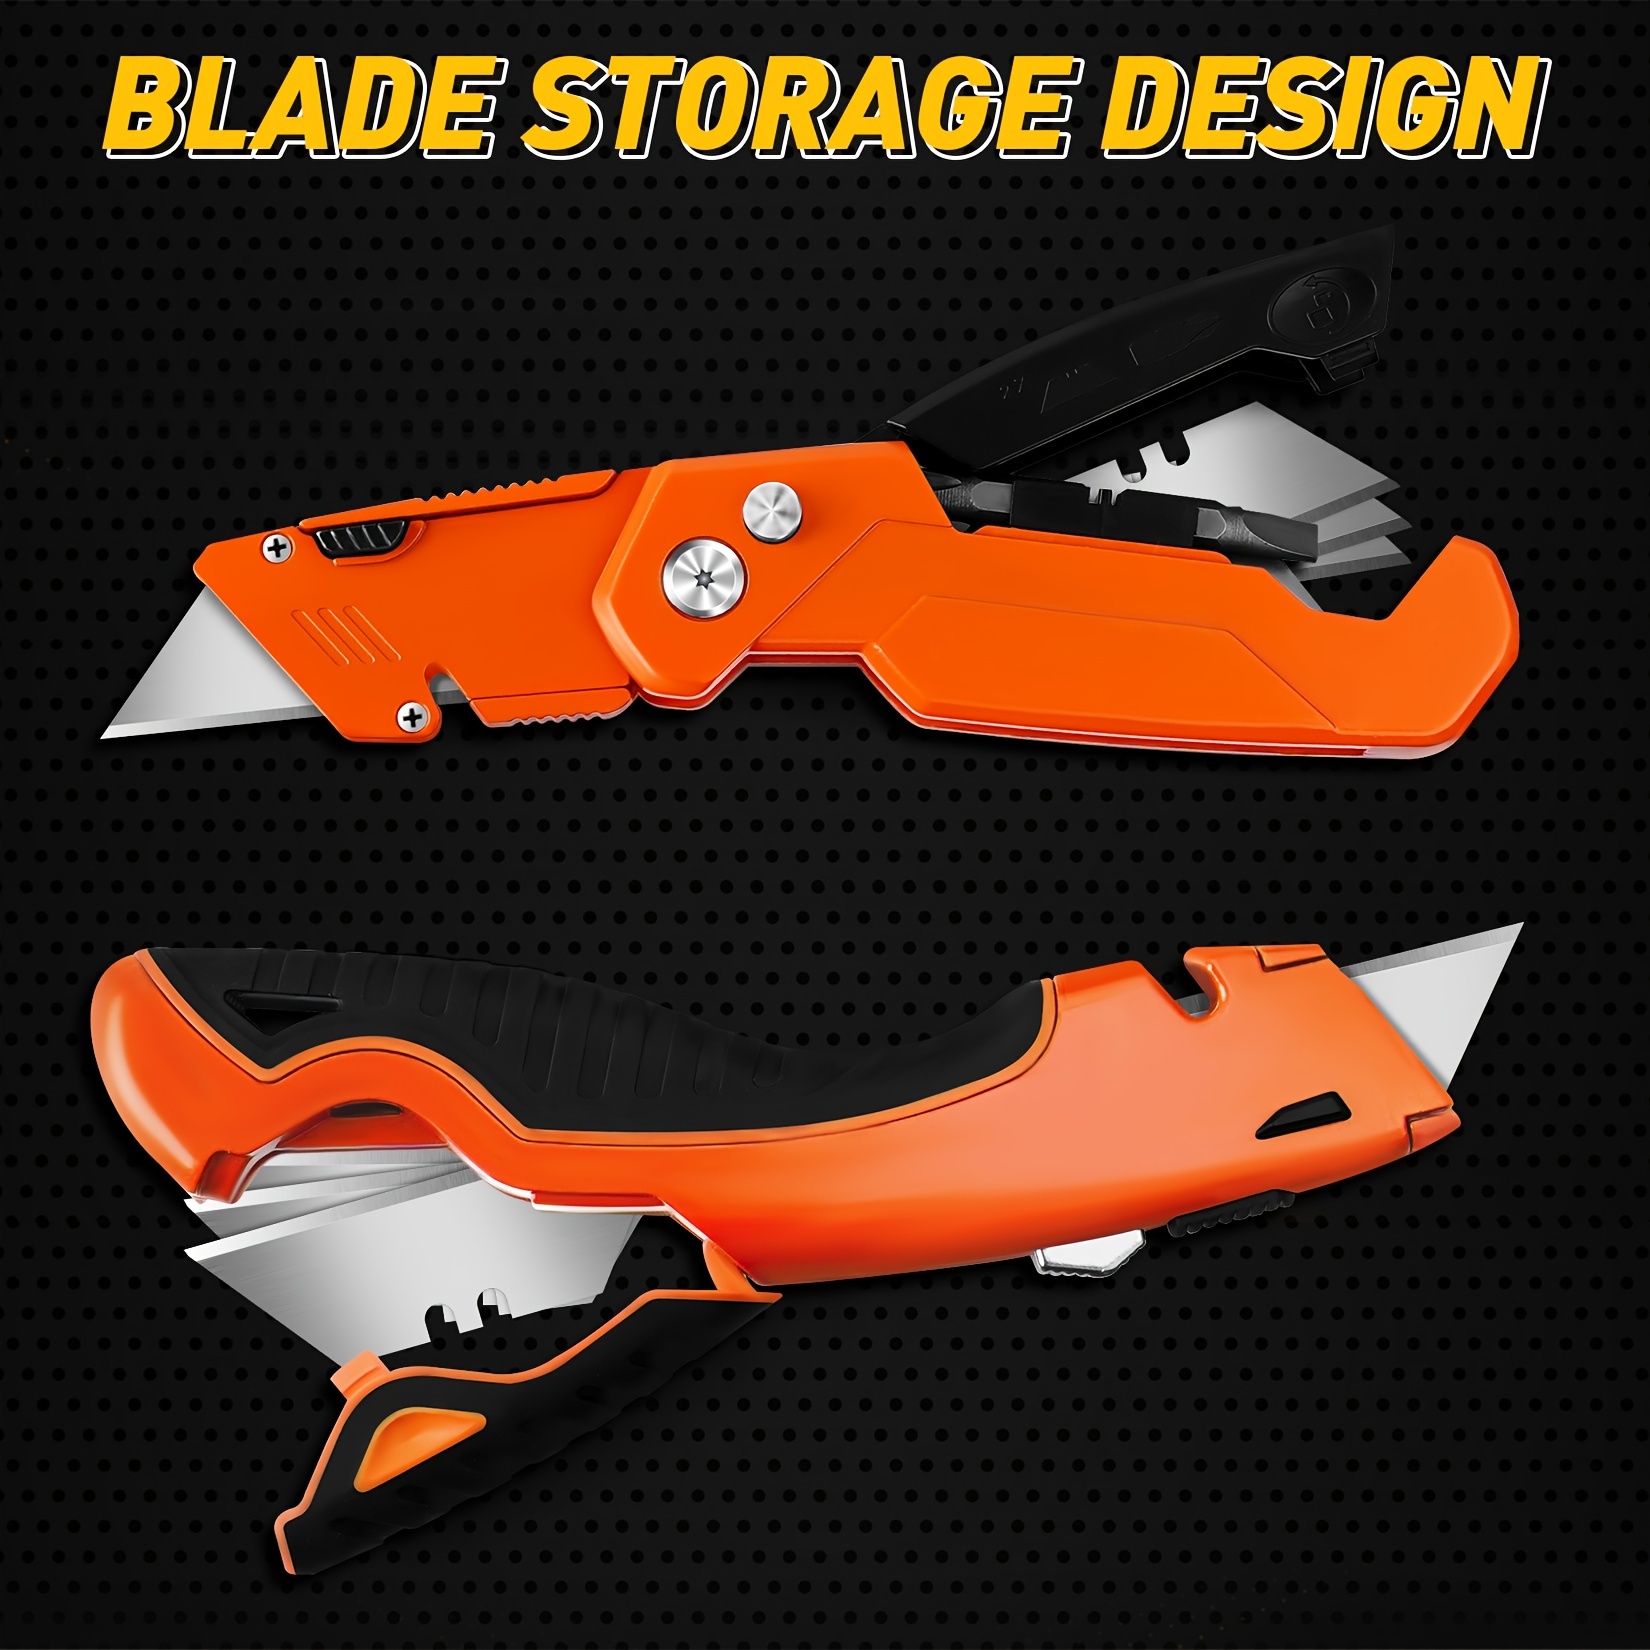 10 Safety Box Cutter Utility Knife Retractable Snap off Razor Blade ORANGE  PINK 